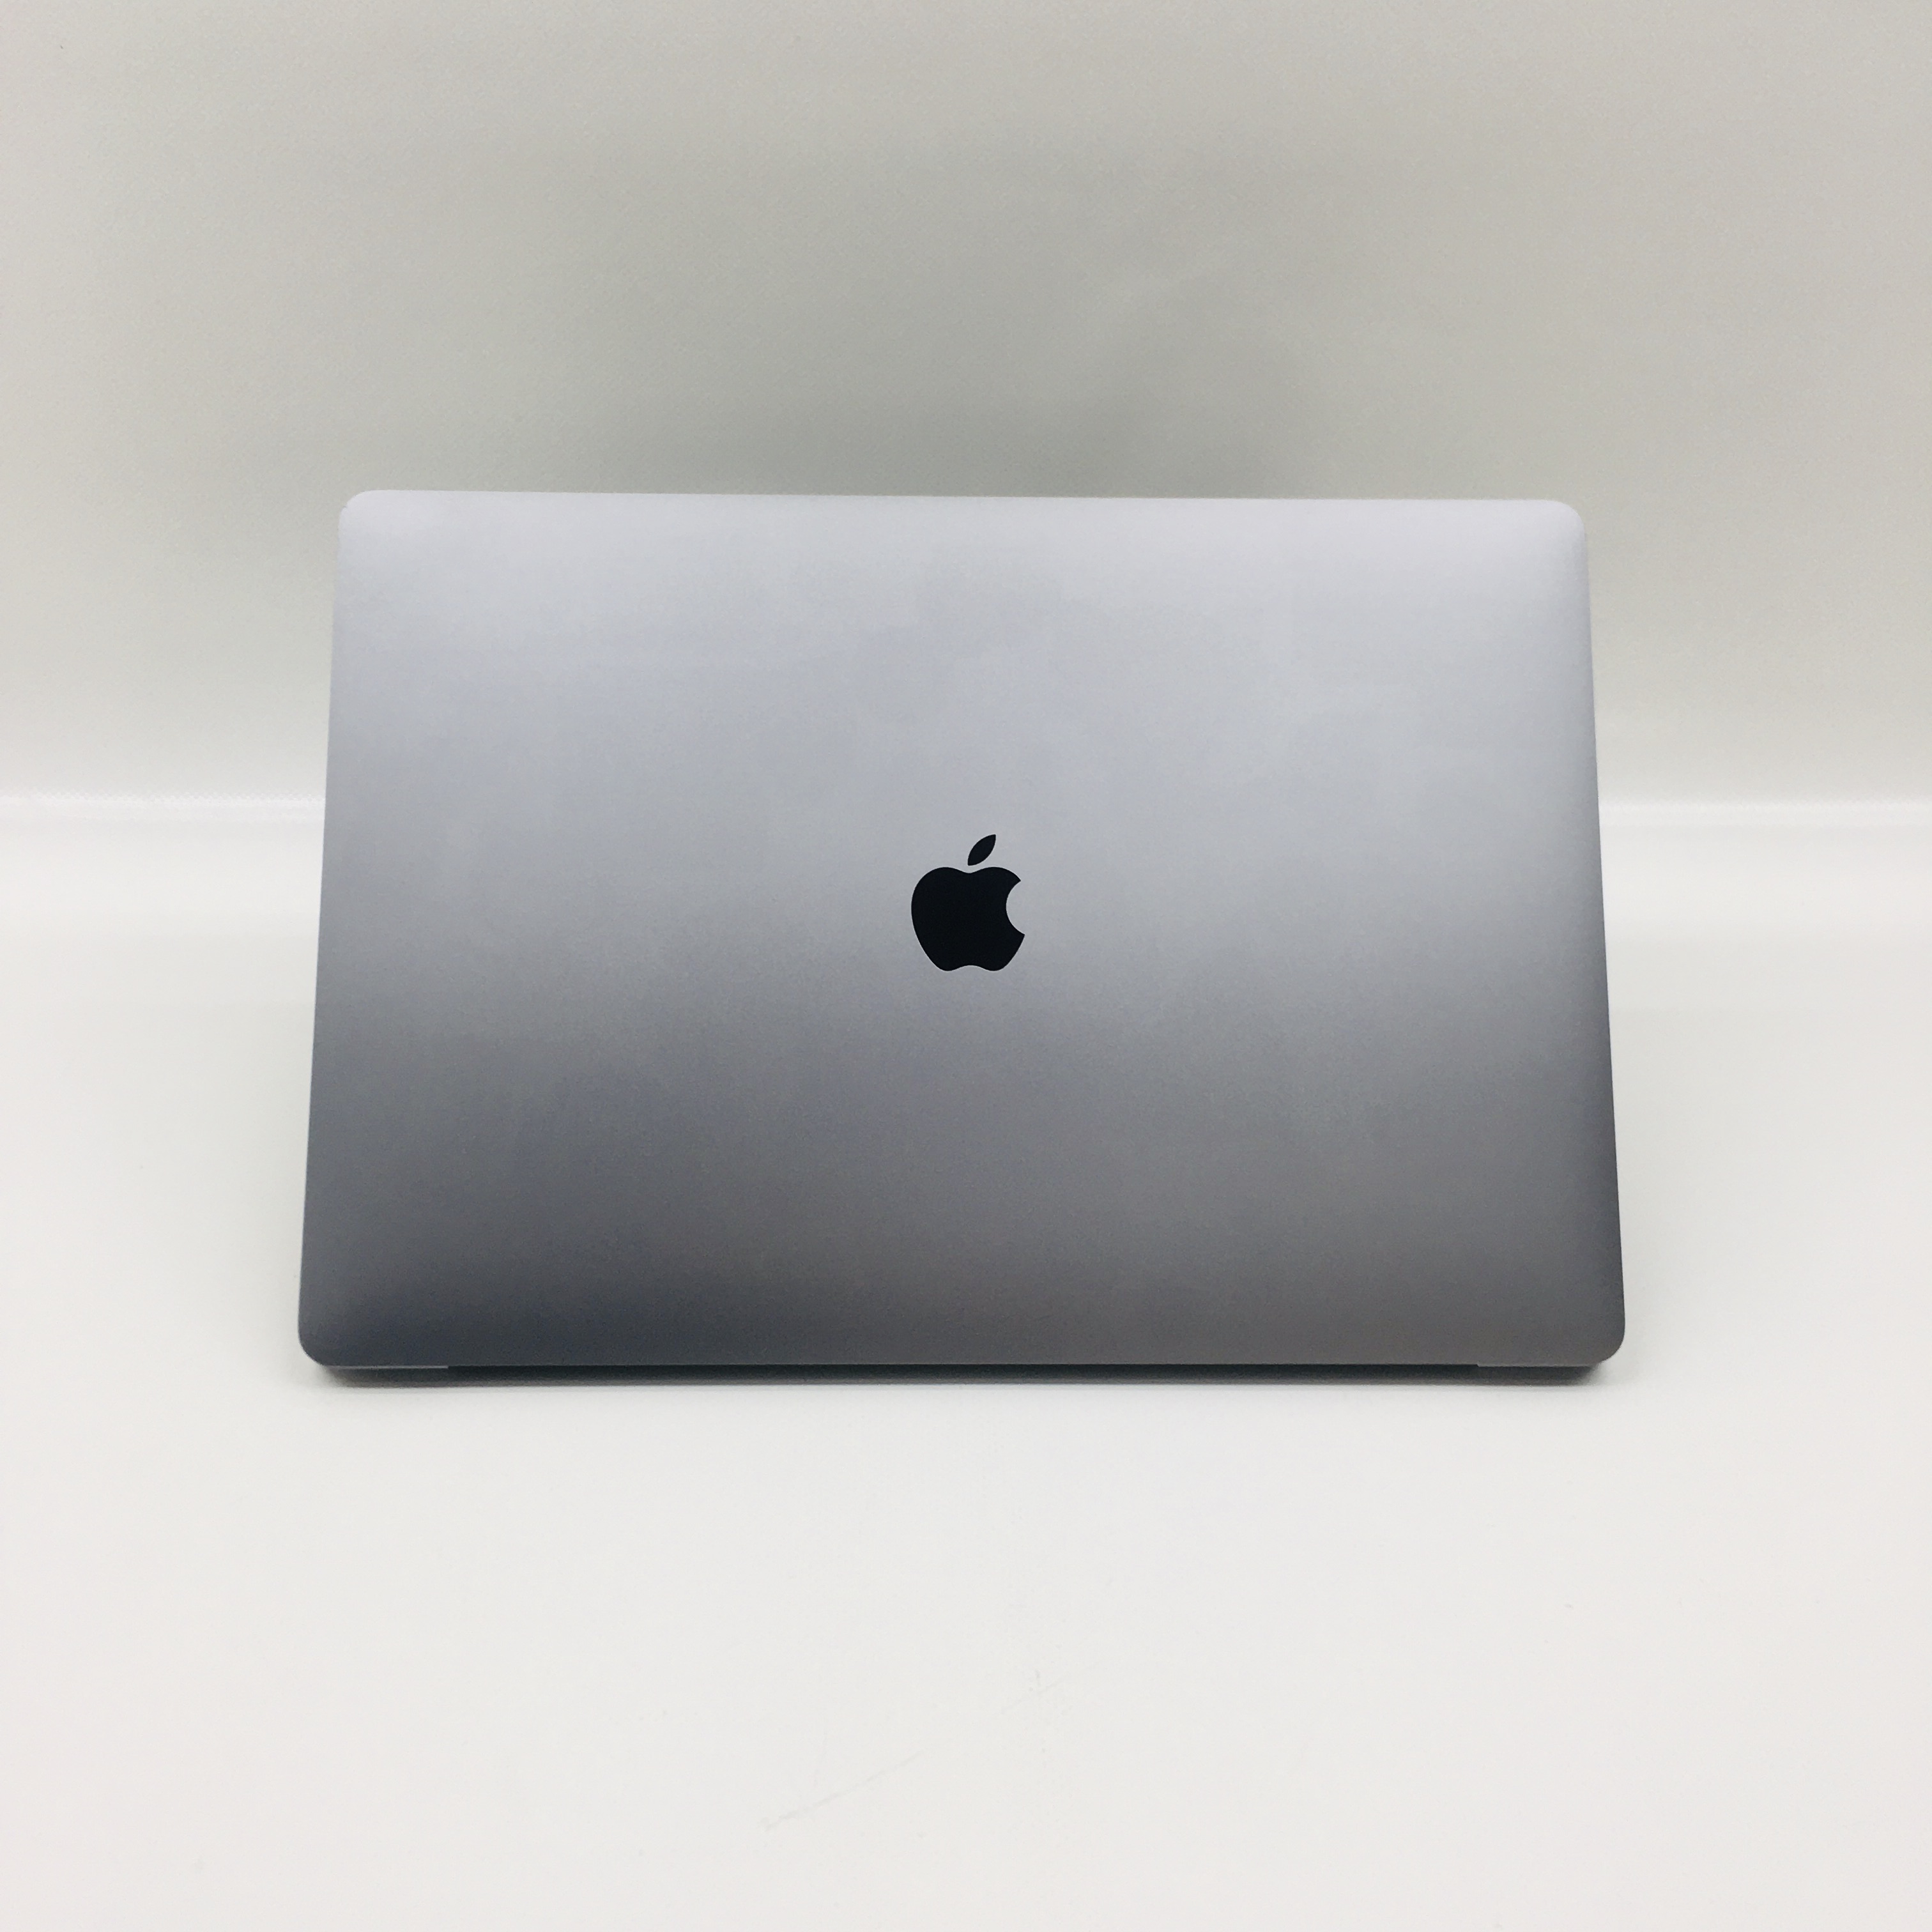 MacBook Pro 16" Touch Bar Late 2019 (Intel 6-Core i7 2.6 GHz 32 GB RAM 512 GB SSD), Space Gray, Intel 6-Core i7 2.6 GHz, 32 GB RAM, 512 GB SSD, image 4